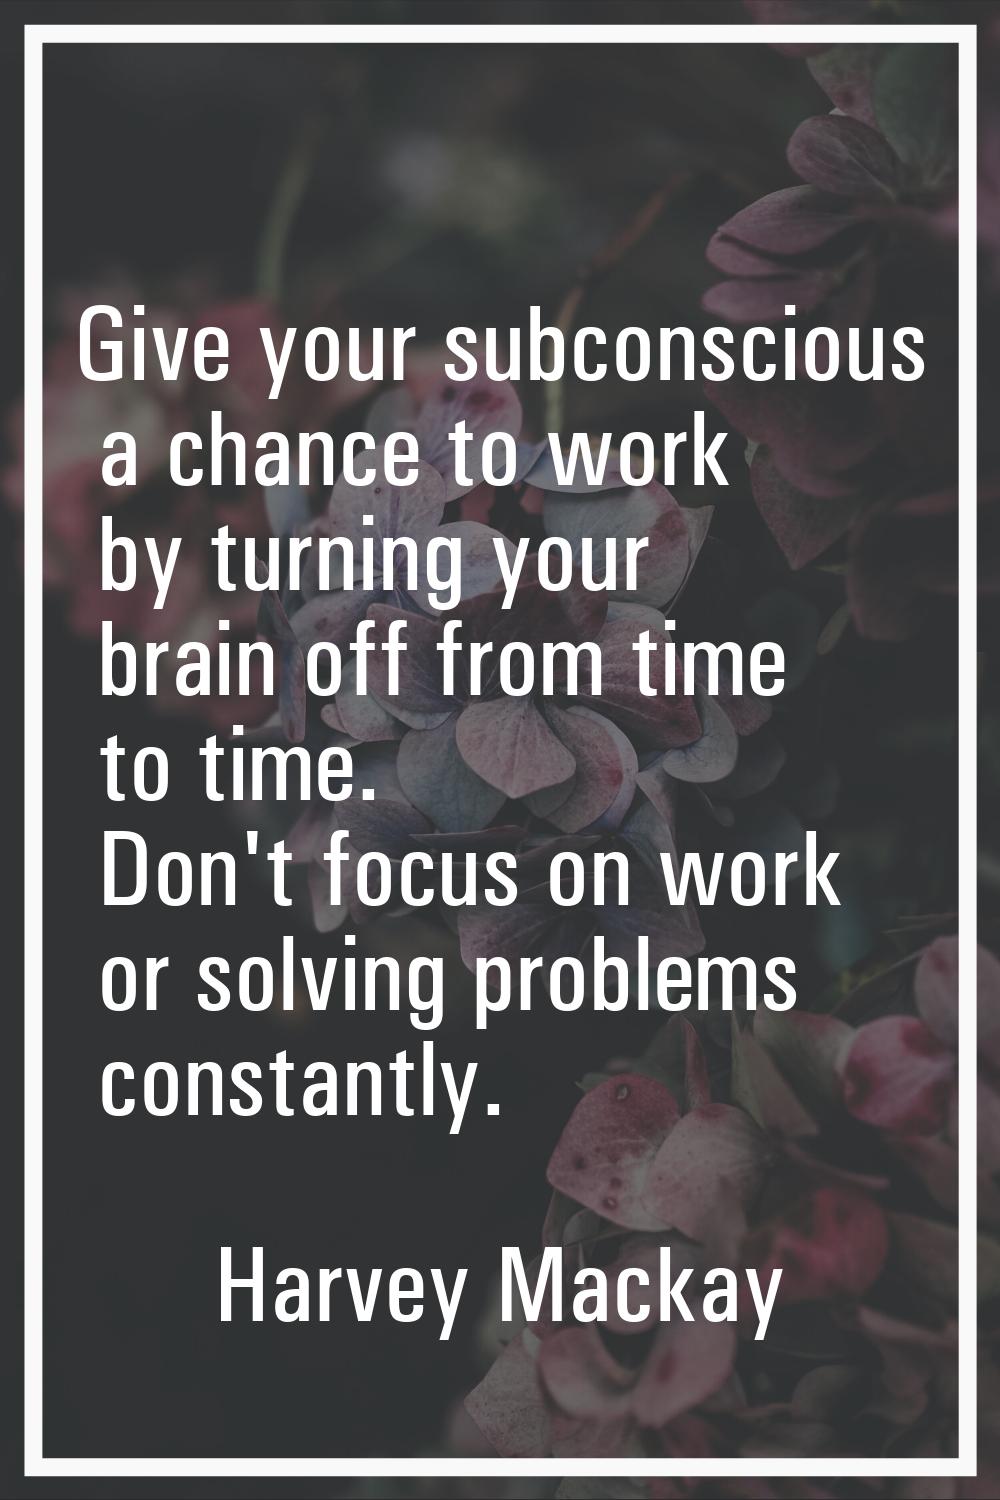 Give your subconscious a chance to work by turning your brain off from time to time. Don't focus on